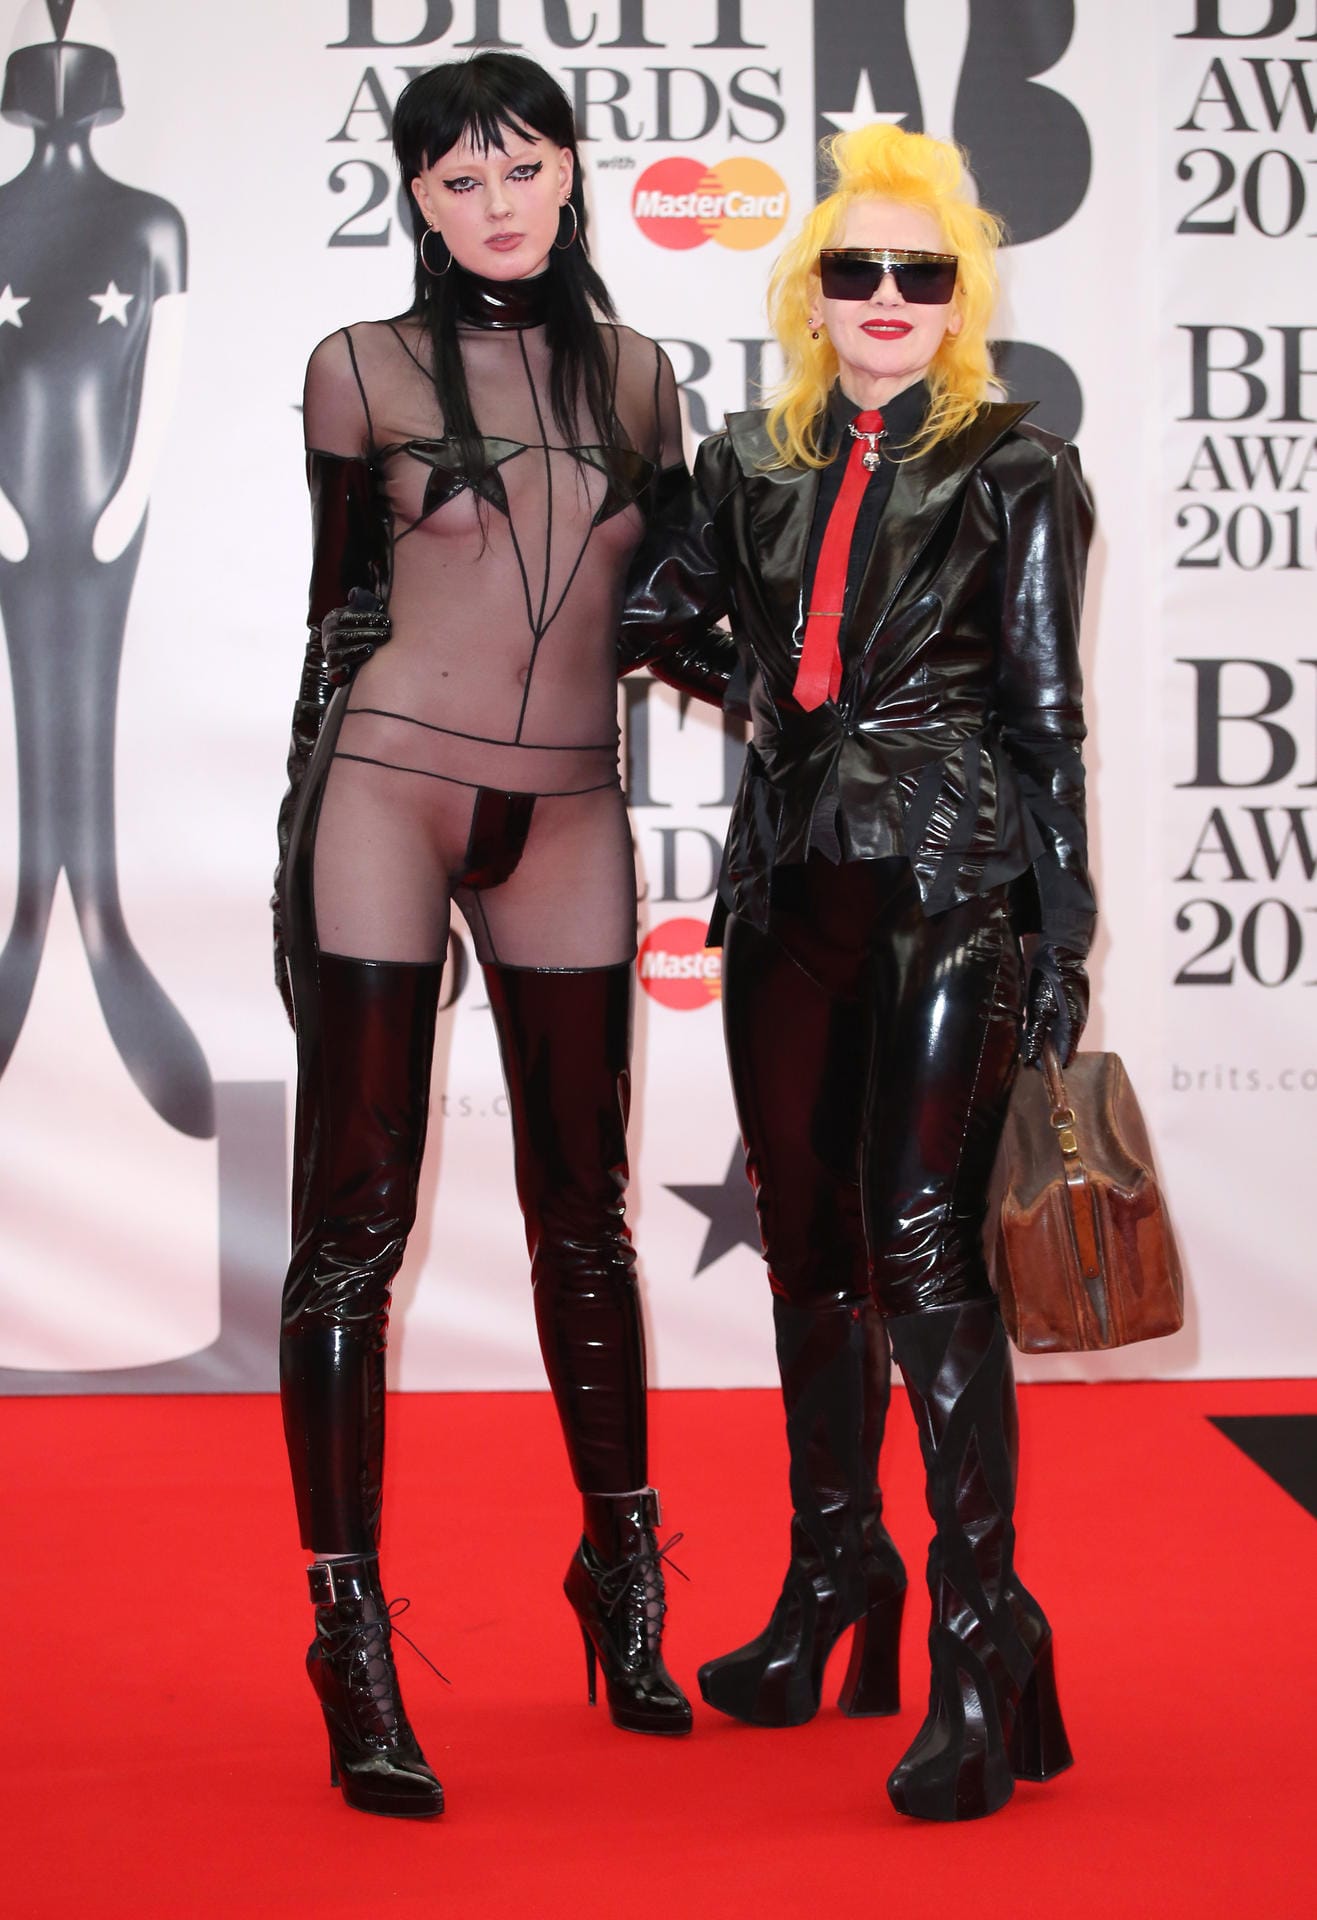 The Brit Awards 2016